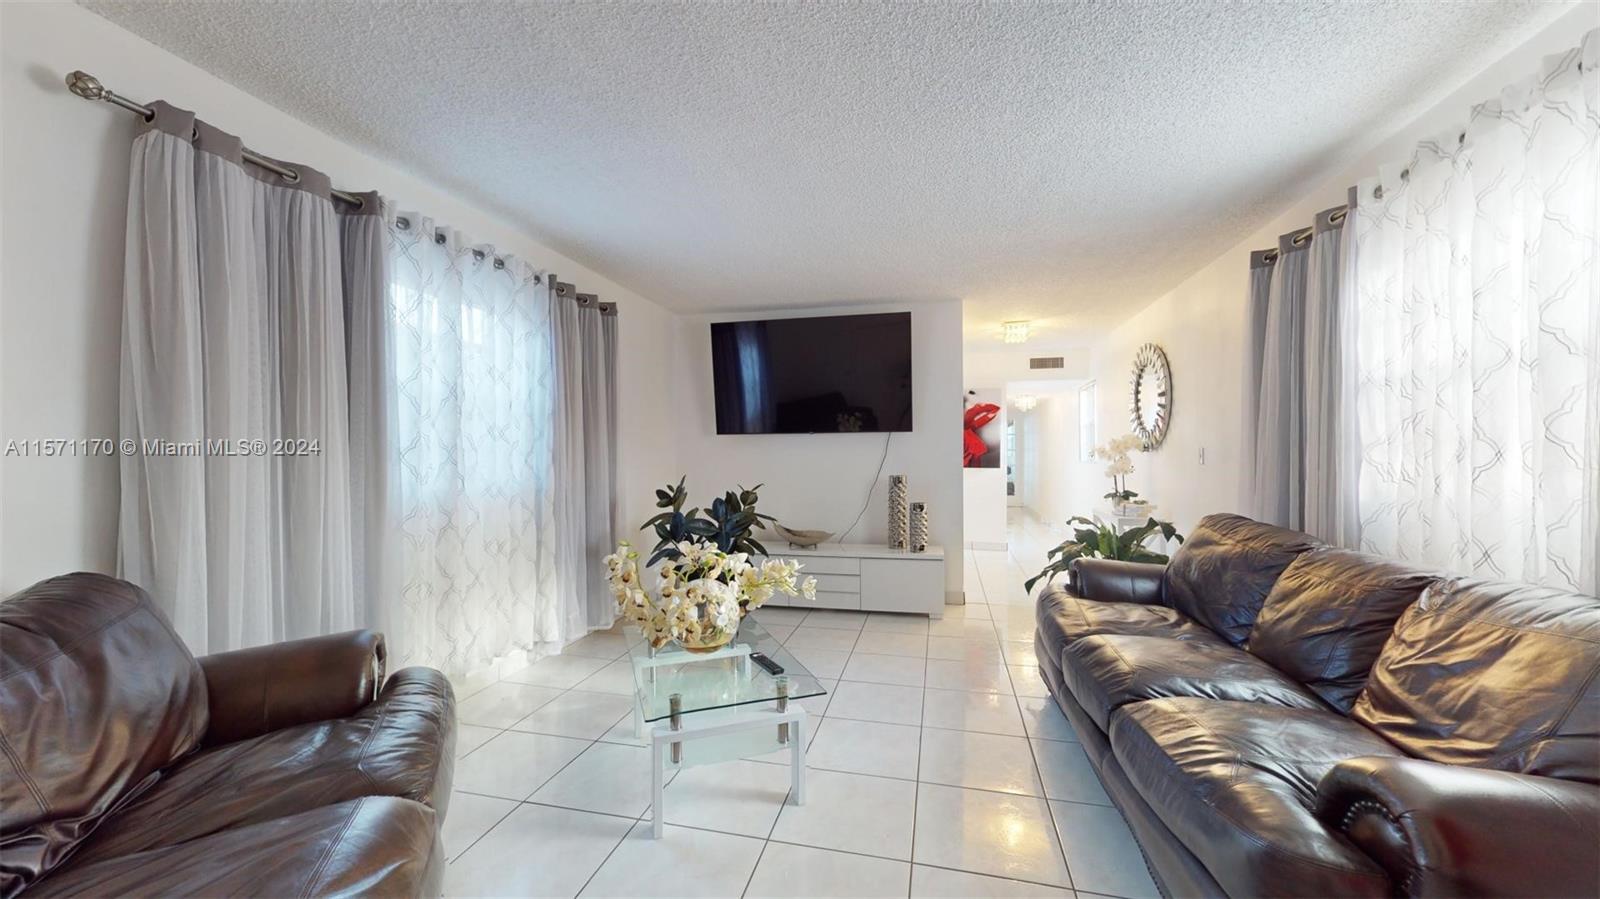 Welcome to this unique home in a desirable Hialeah neighborhood. This charming residence boast 3 bed